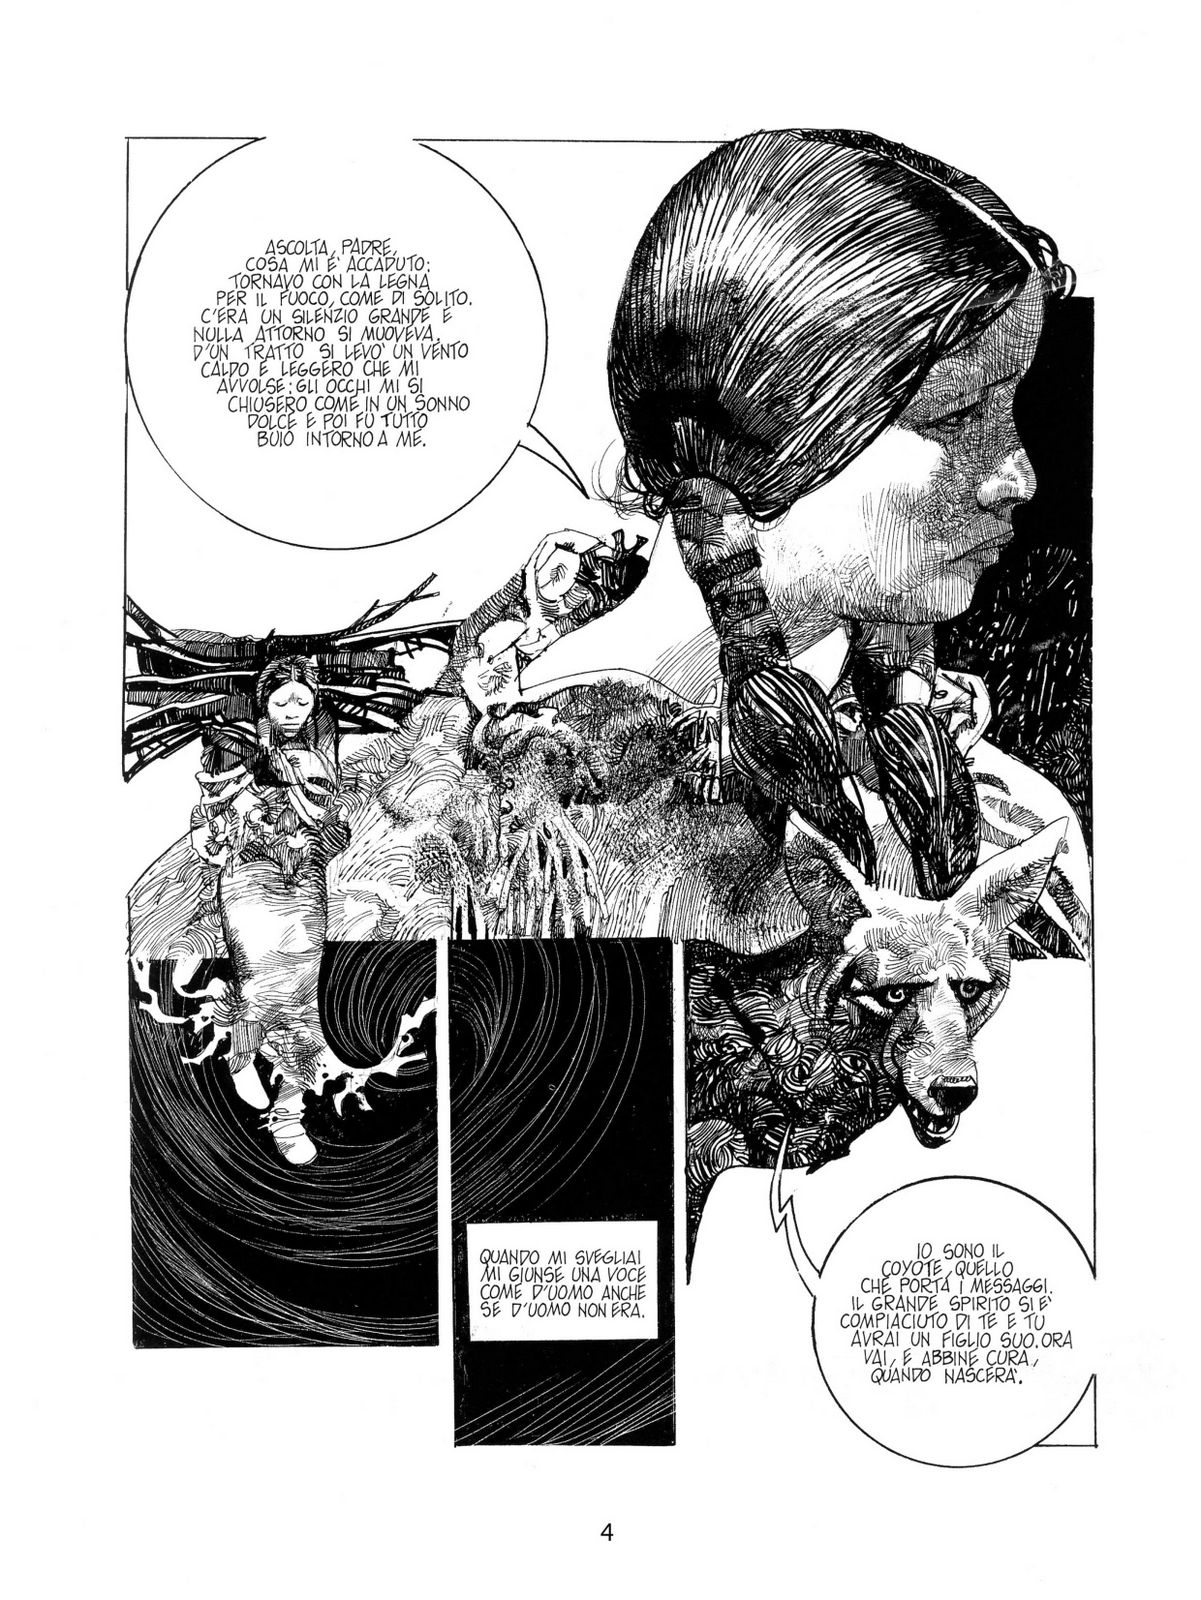 Lionheart Illustration and Design: Sergio Toppi, Where Have You Been ...